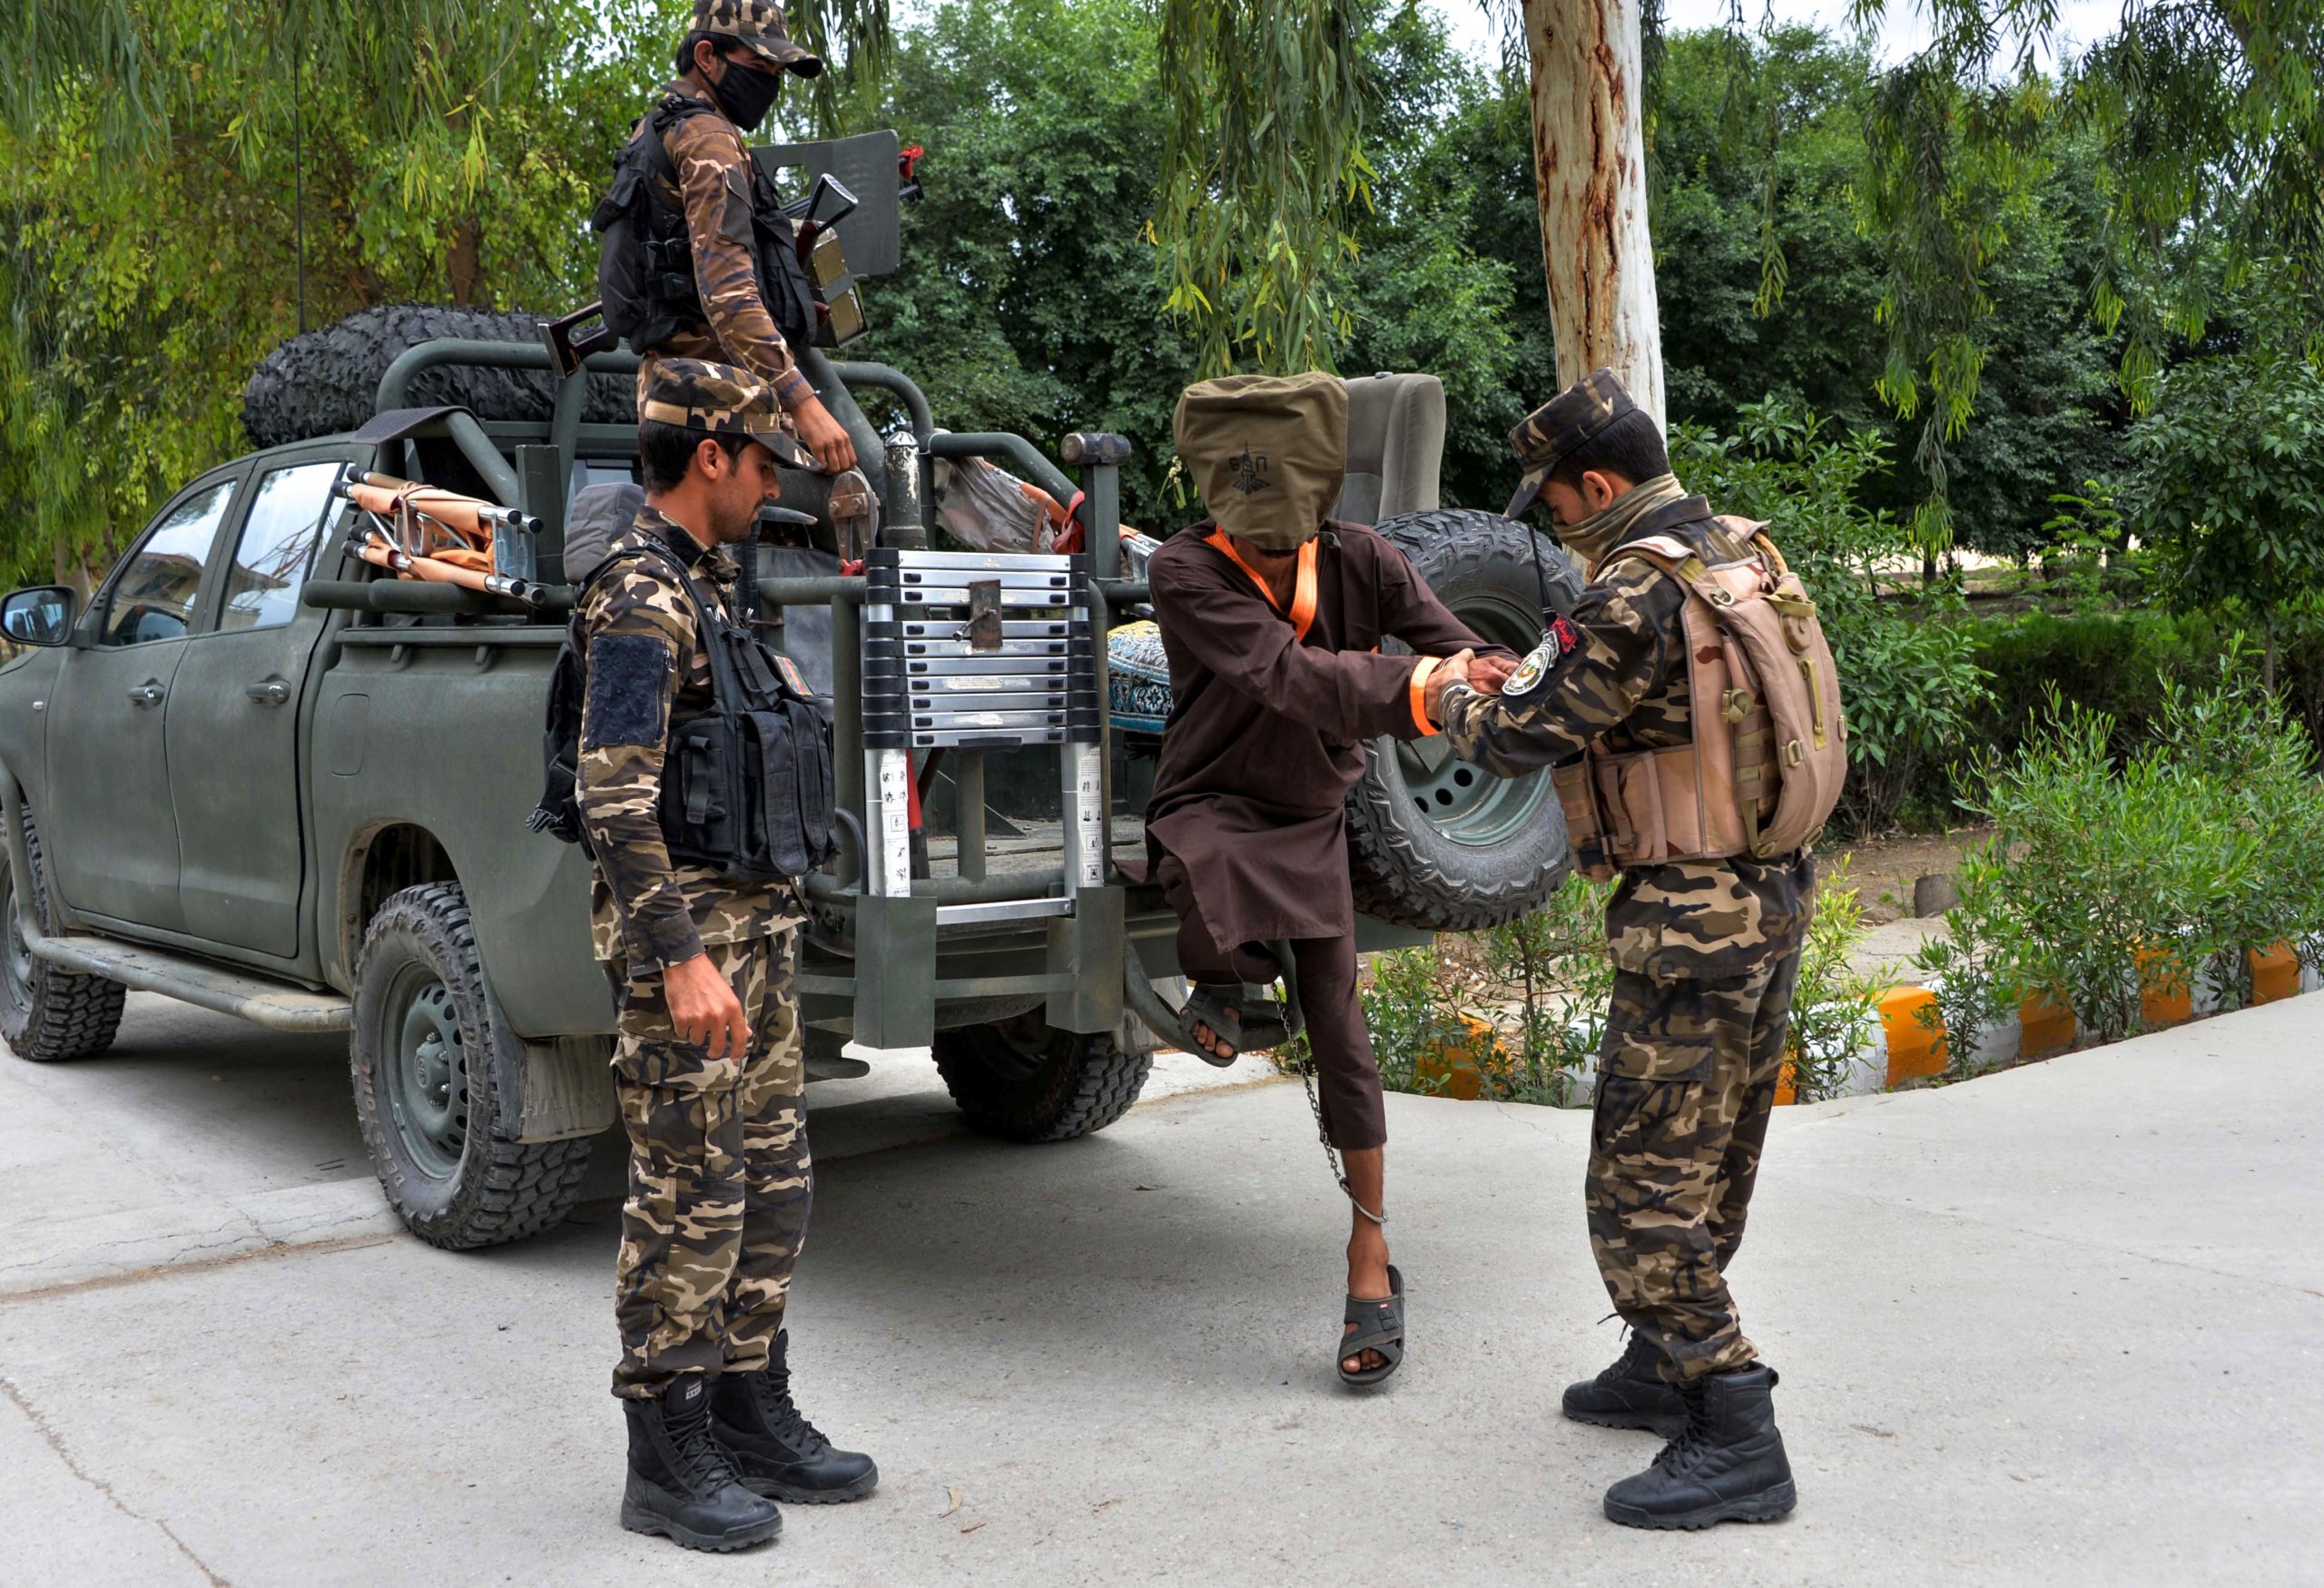 Forces with Afghanistan's National Directorate of Security (NDS) escort an alleged militant as Taliban and Islamic State (IS) fighters are presented to the media in Jalalabad on May 23, 2019. (Photo by NOORULLAH SHIRZADA / AFP) (Photo credit should read NOORULLAH SHIRZADA/AFP via Getty Images)